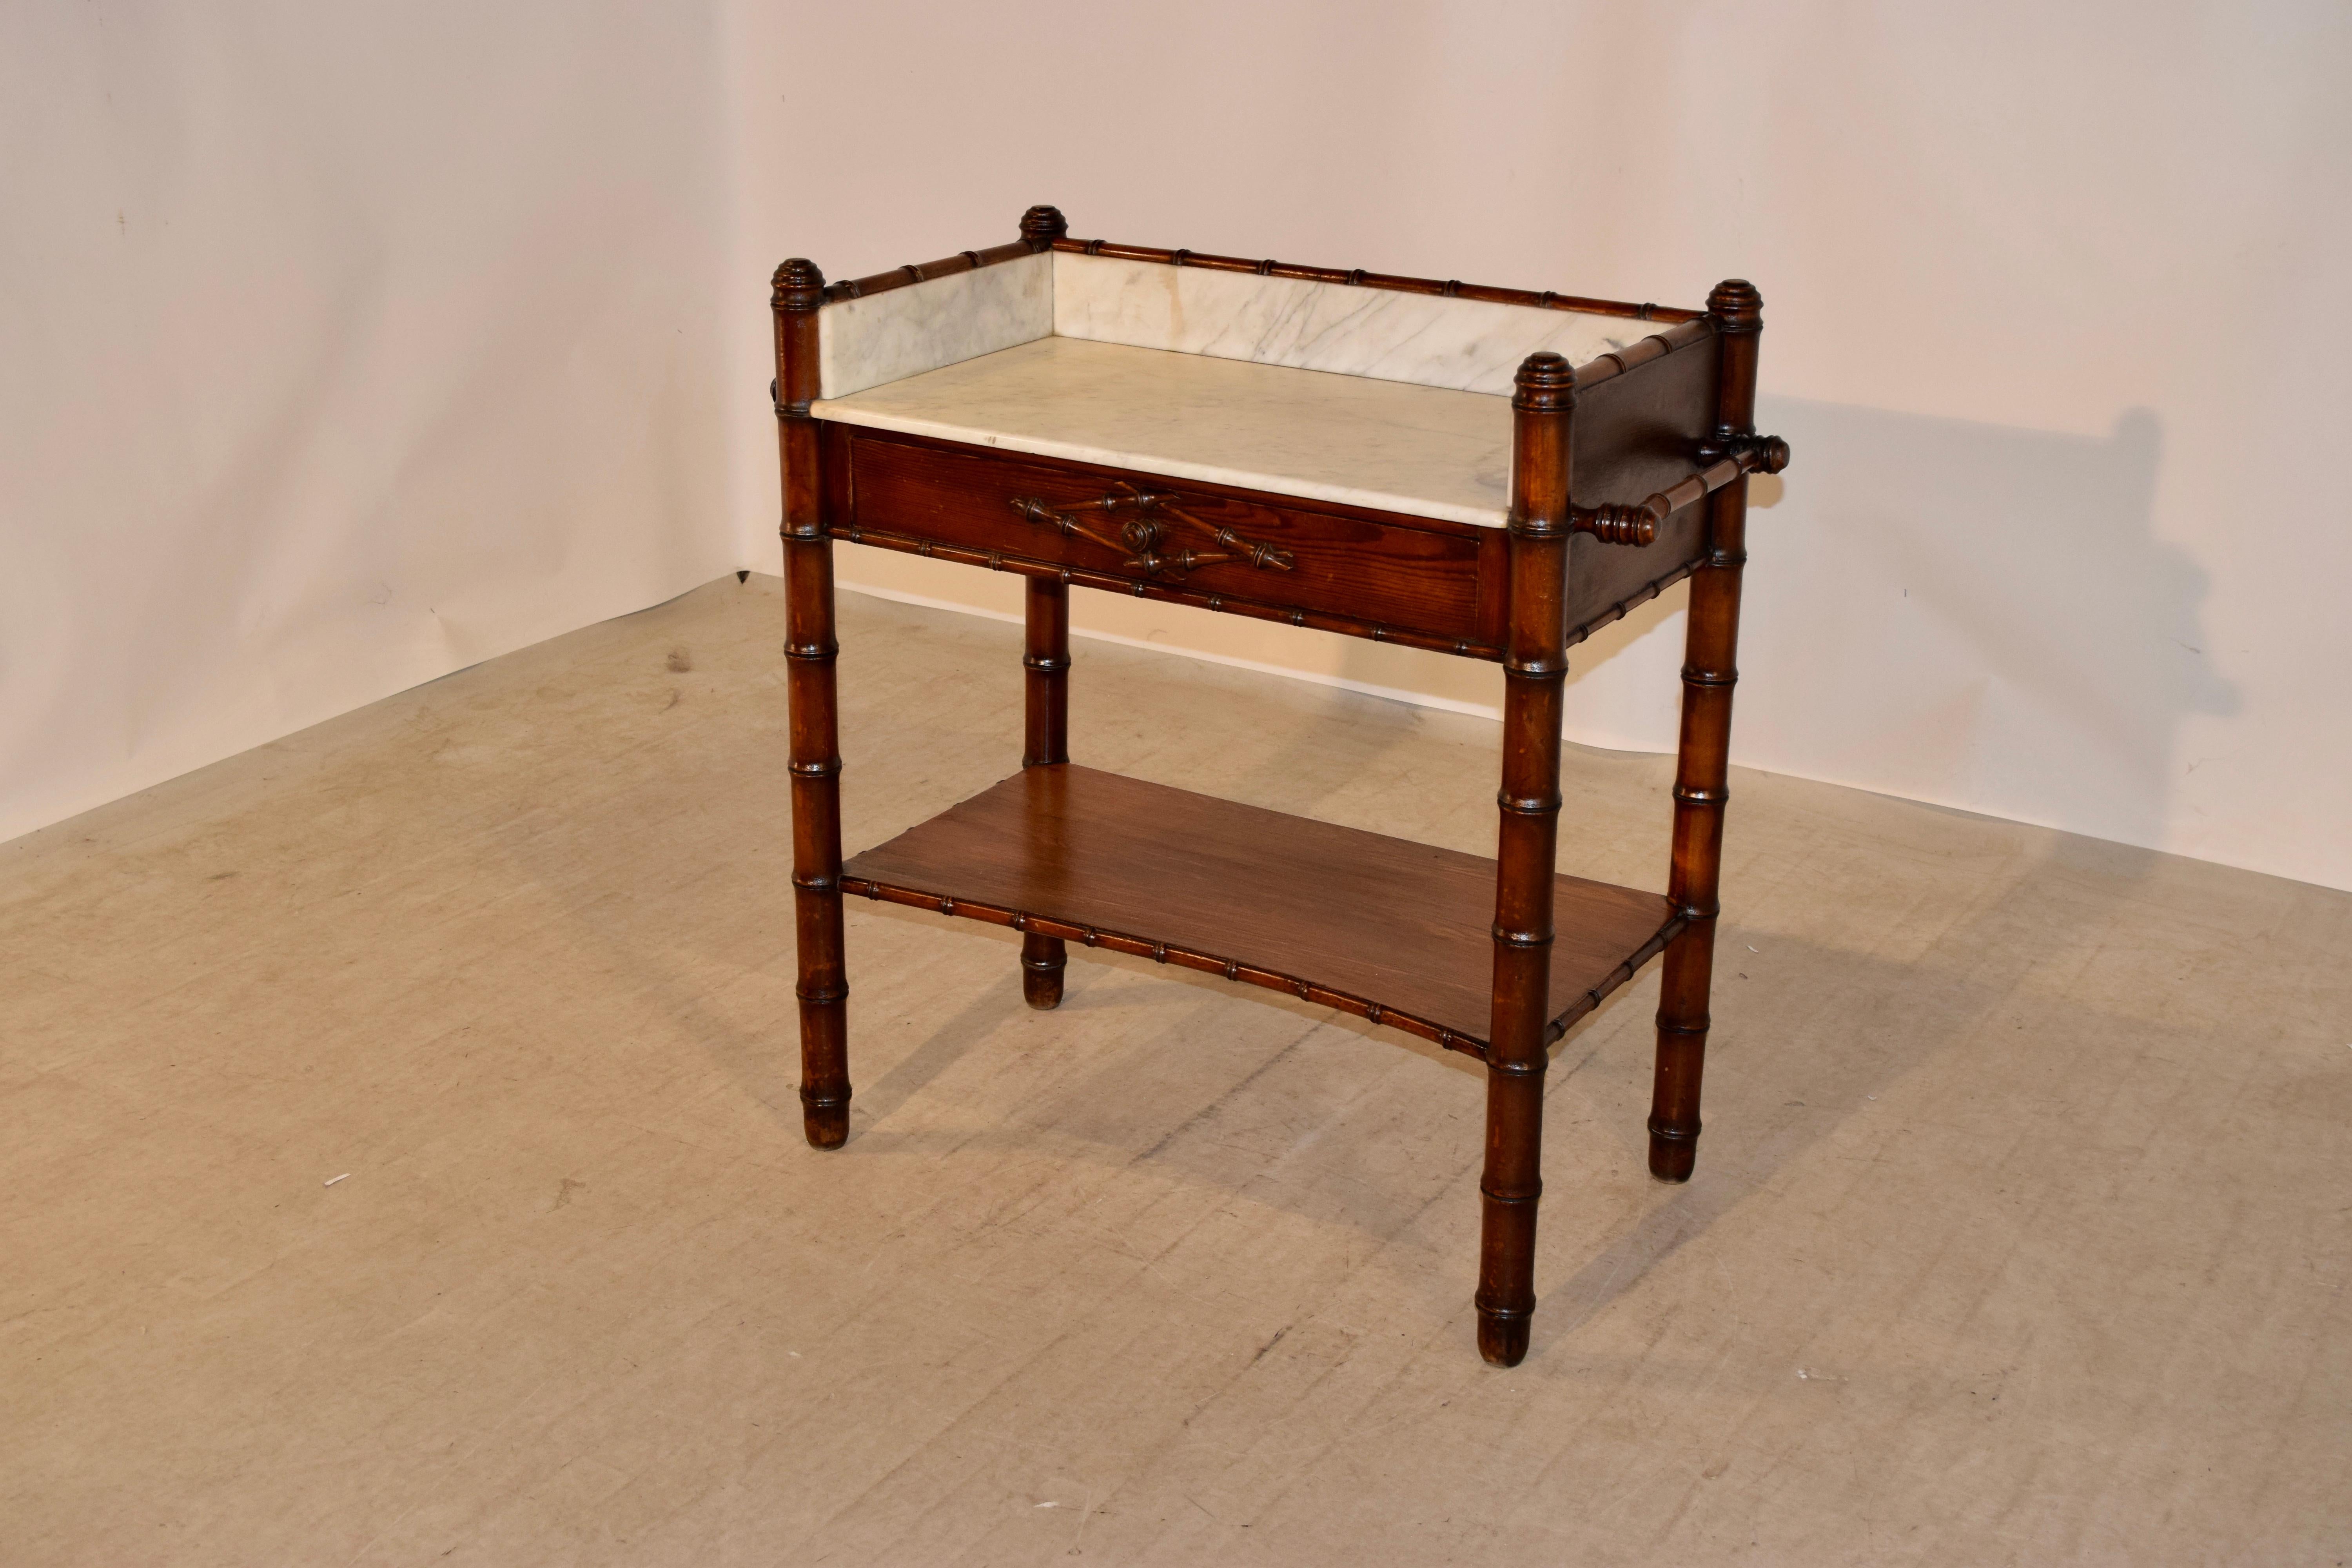 19th Century French Wash Stand (Art nouveau)